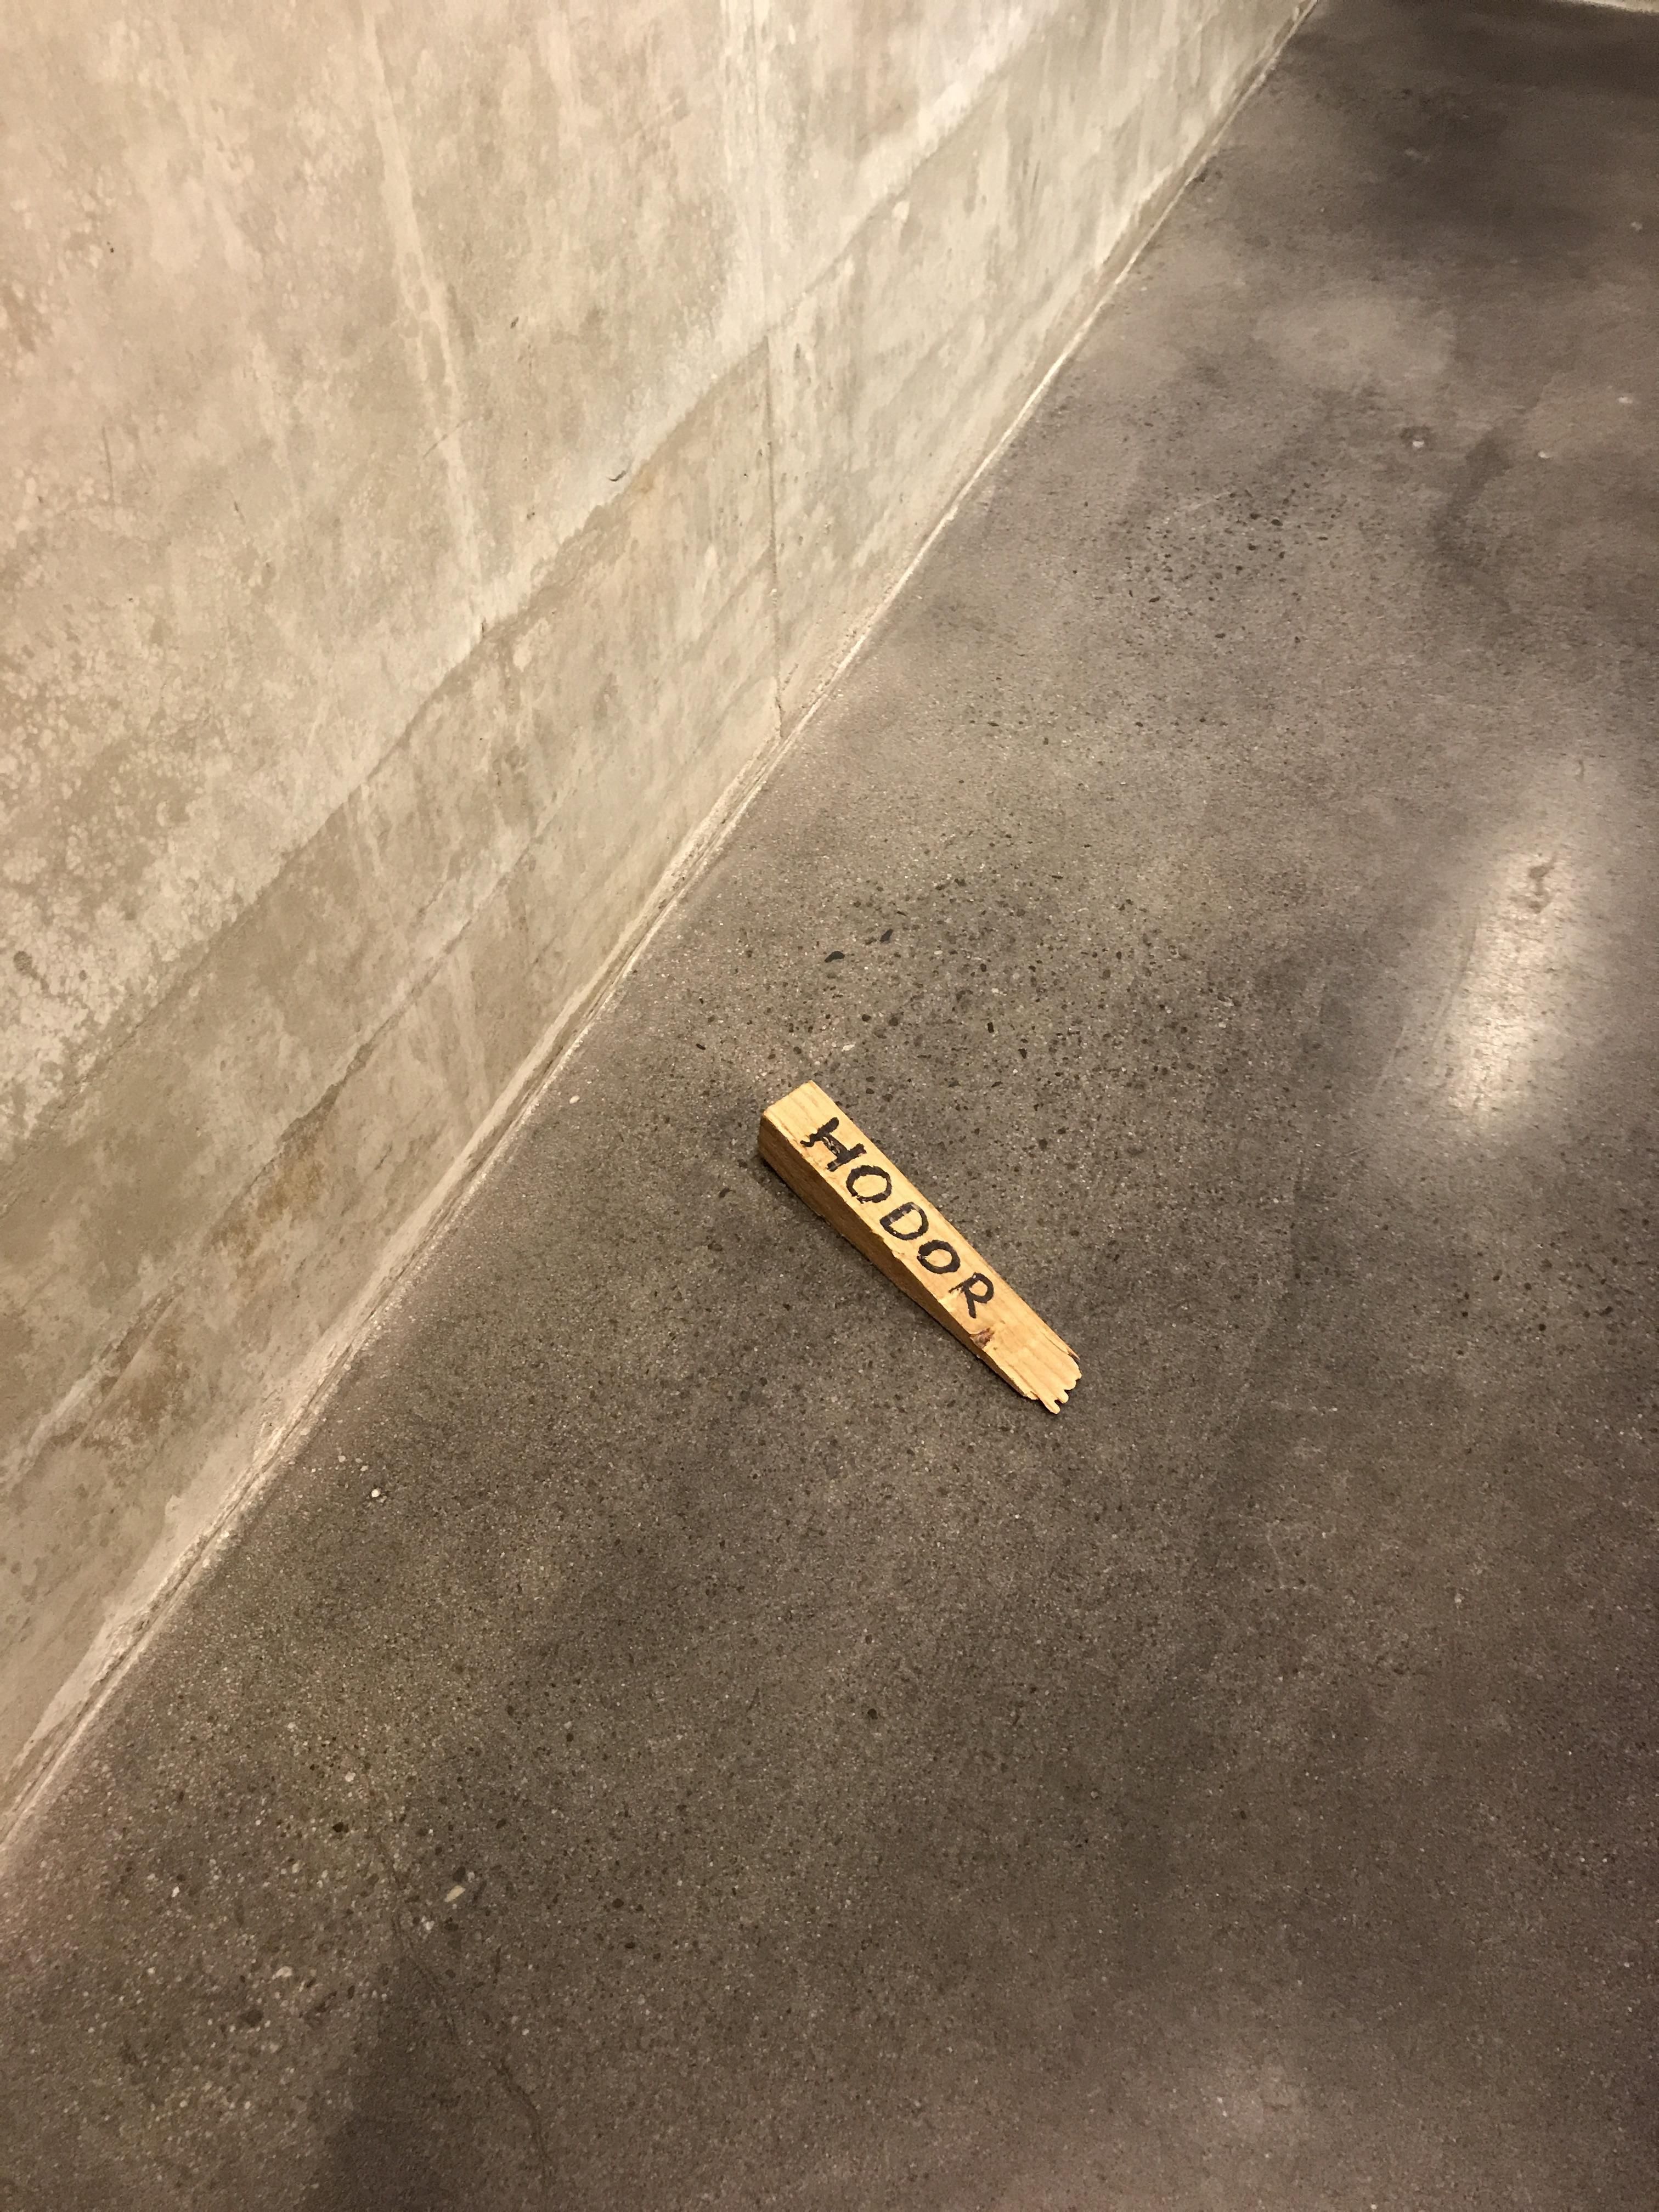 Found this doorstop in the lobby of my building.